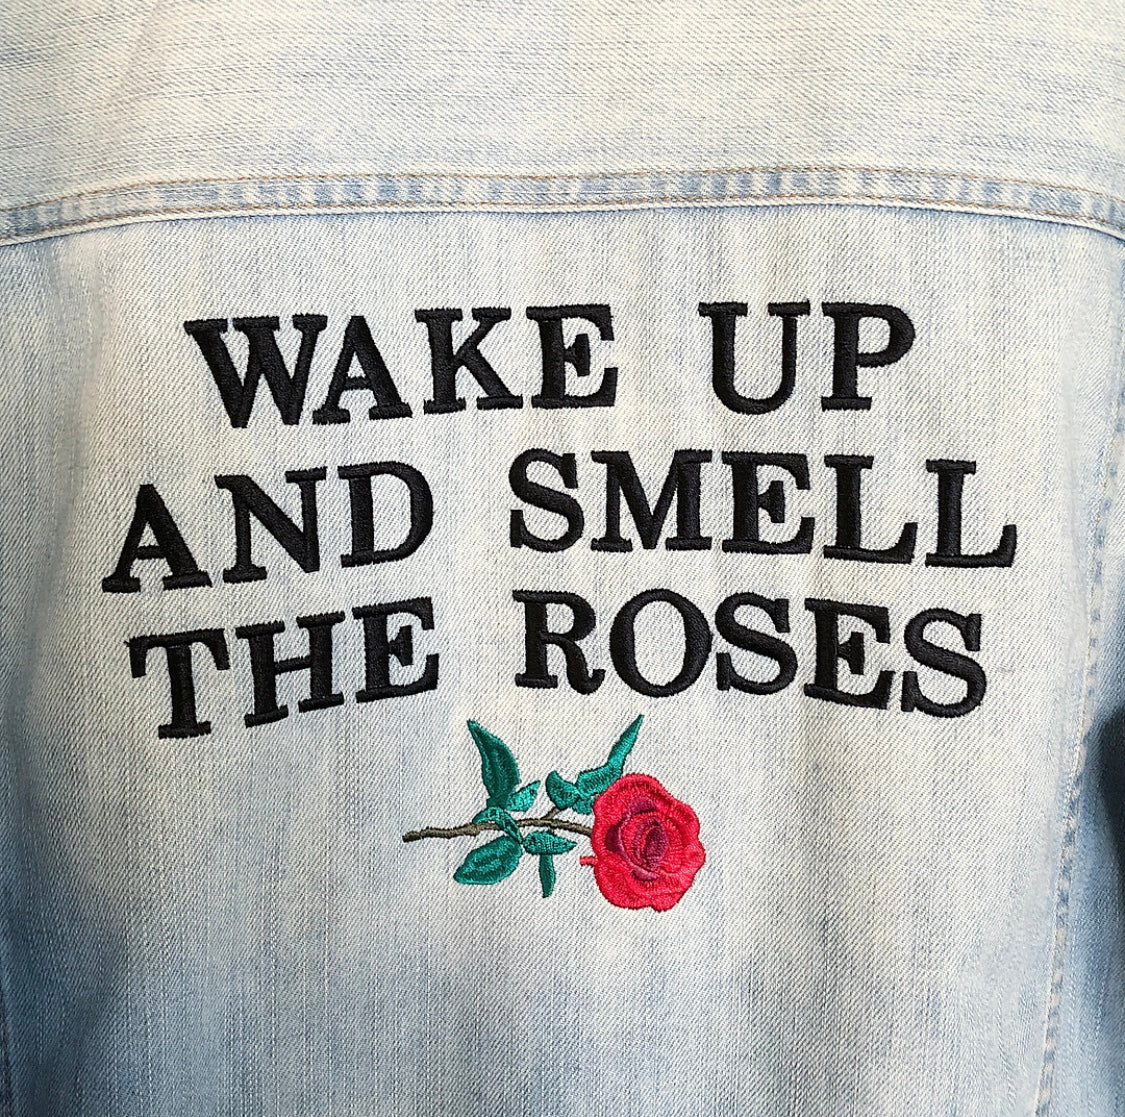 ROSES EMBROIDERED DENIM JACKET by MENACE